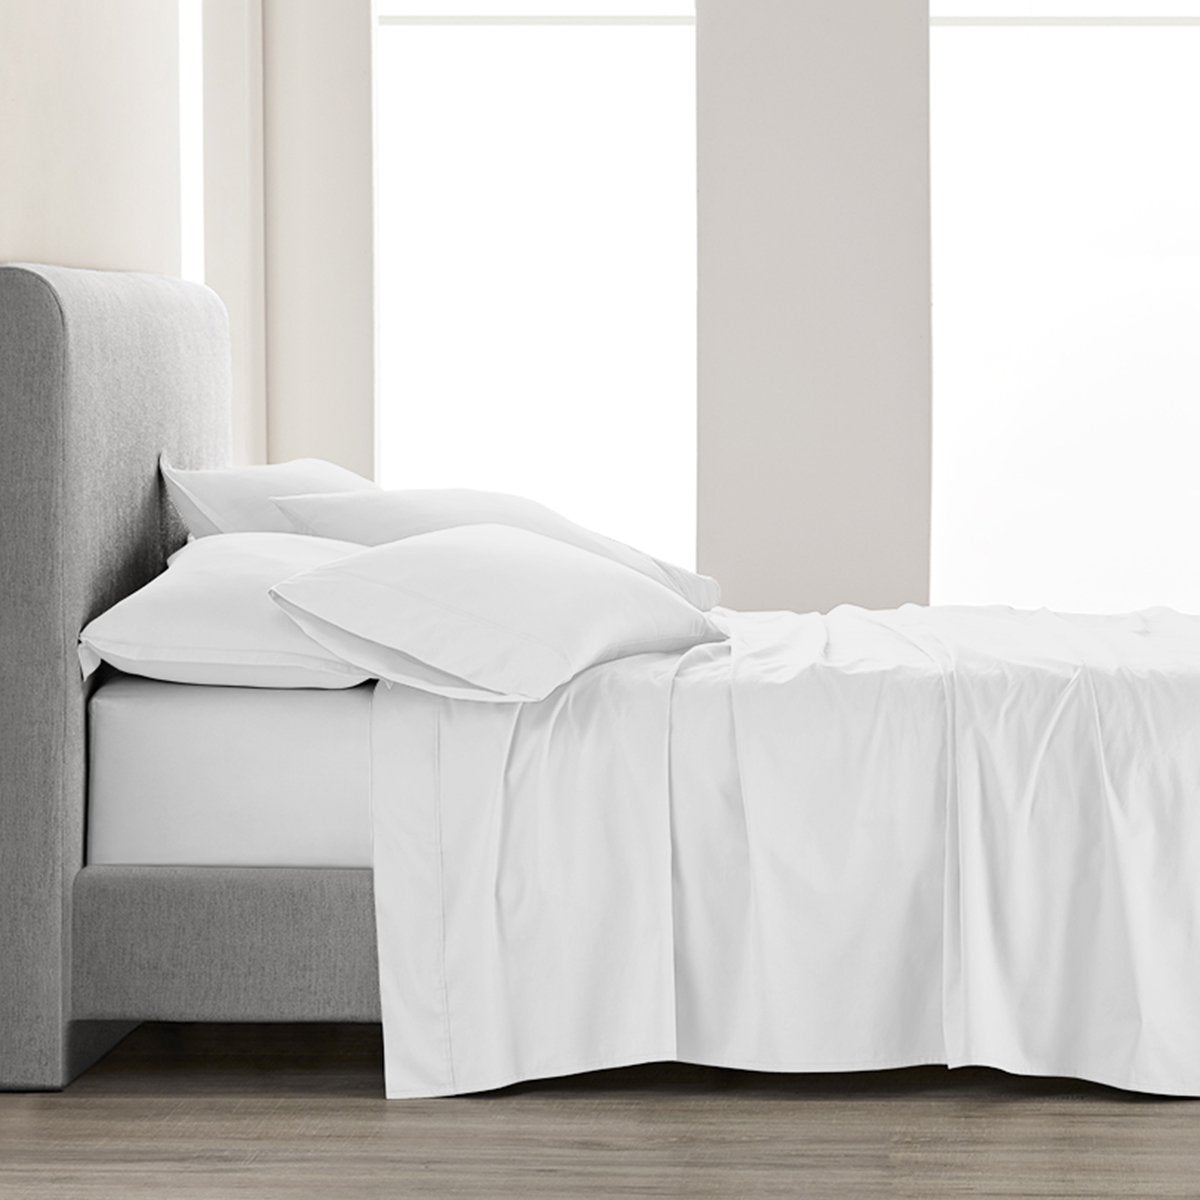 Under The Canopy Organic Percale Sheet Set - White White / Full Bed